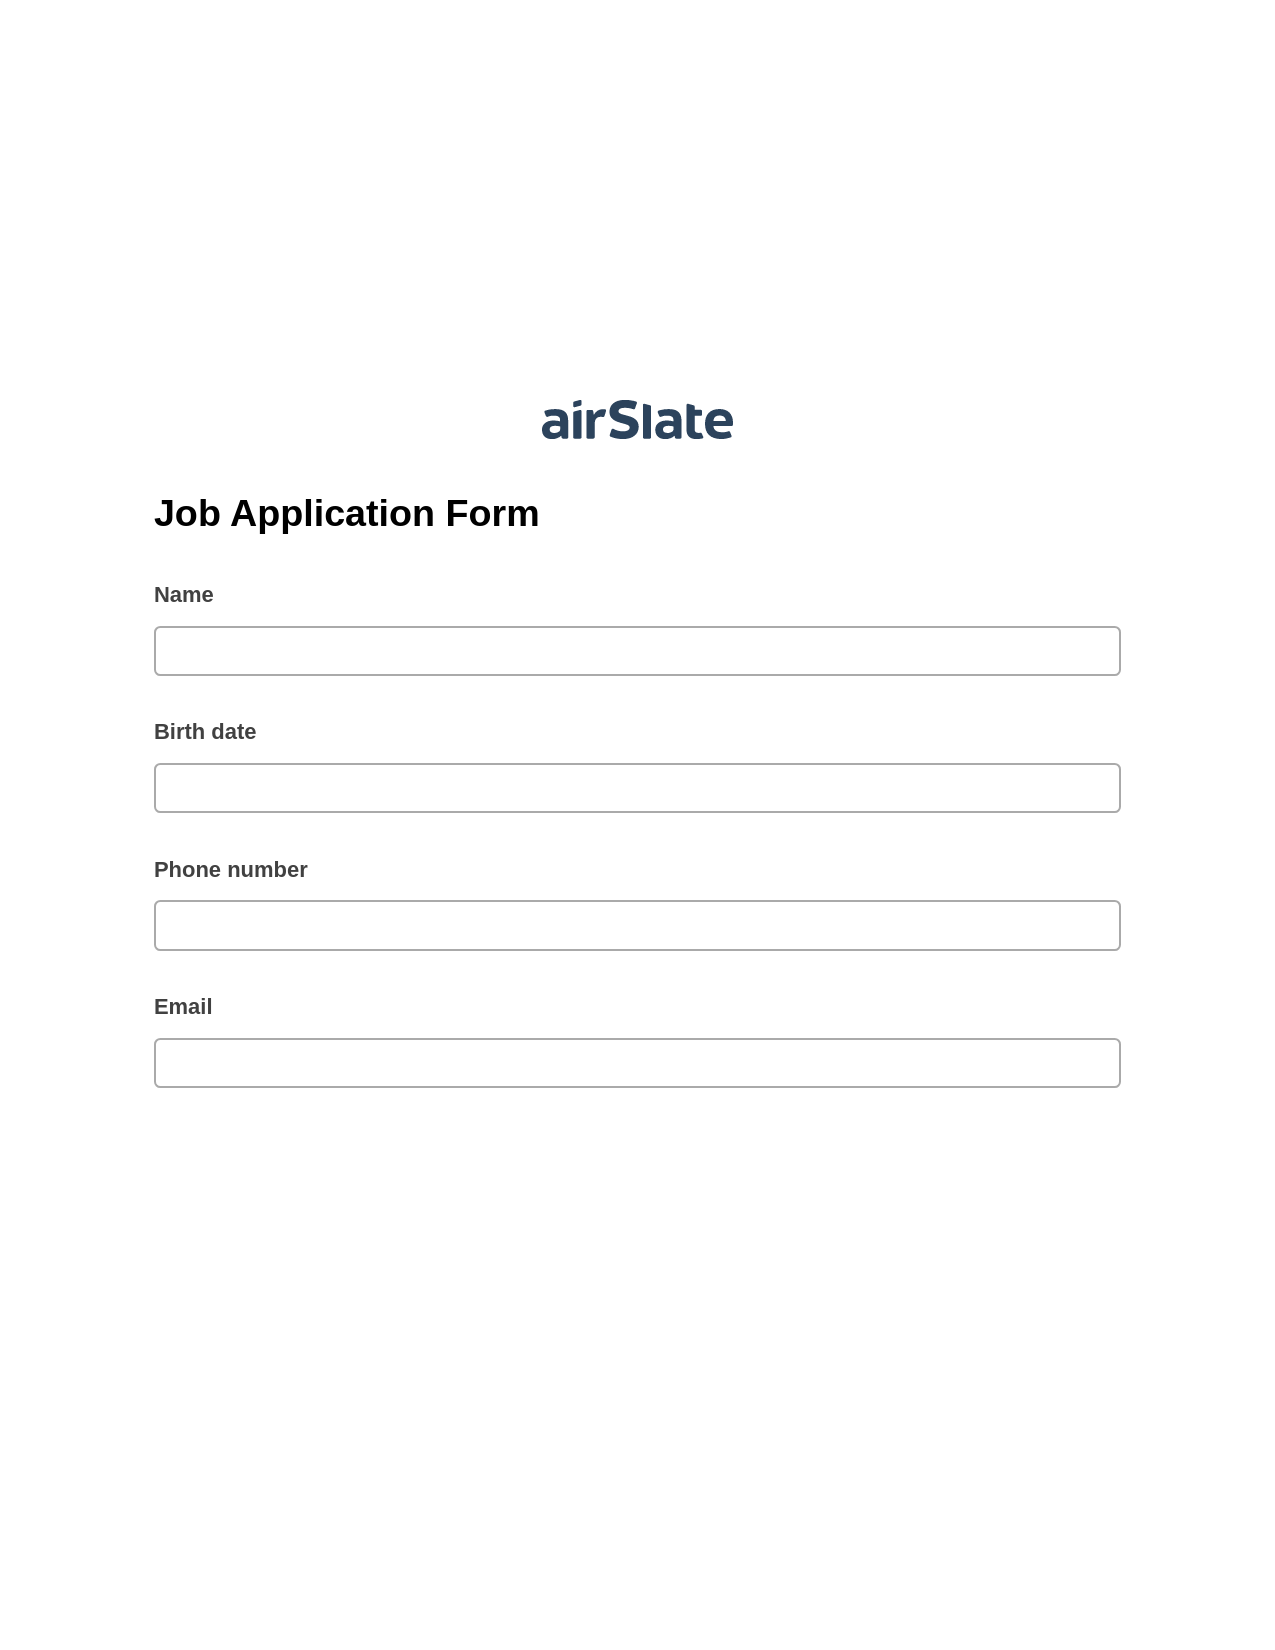 Multirole Job Application Form Pre-fill from CSV File Bot, Create Slate from another Flow Bot, Archive to SharePoint Folder Bot